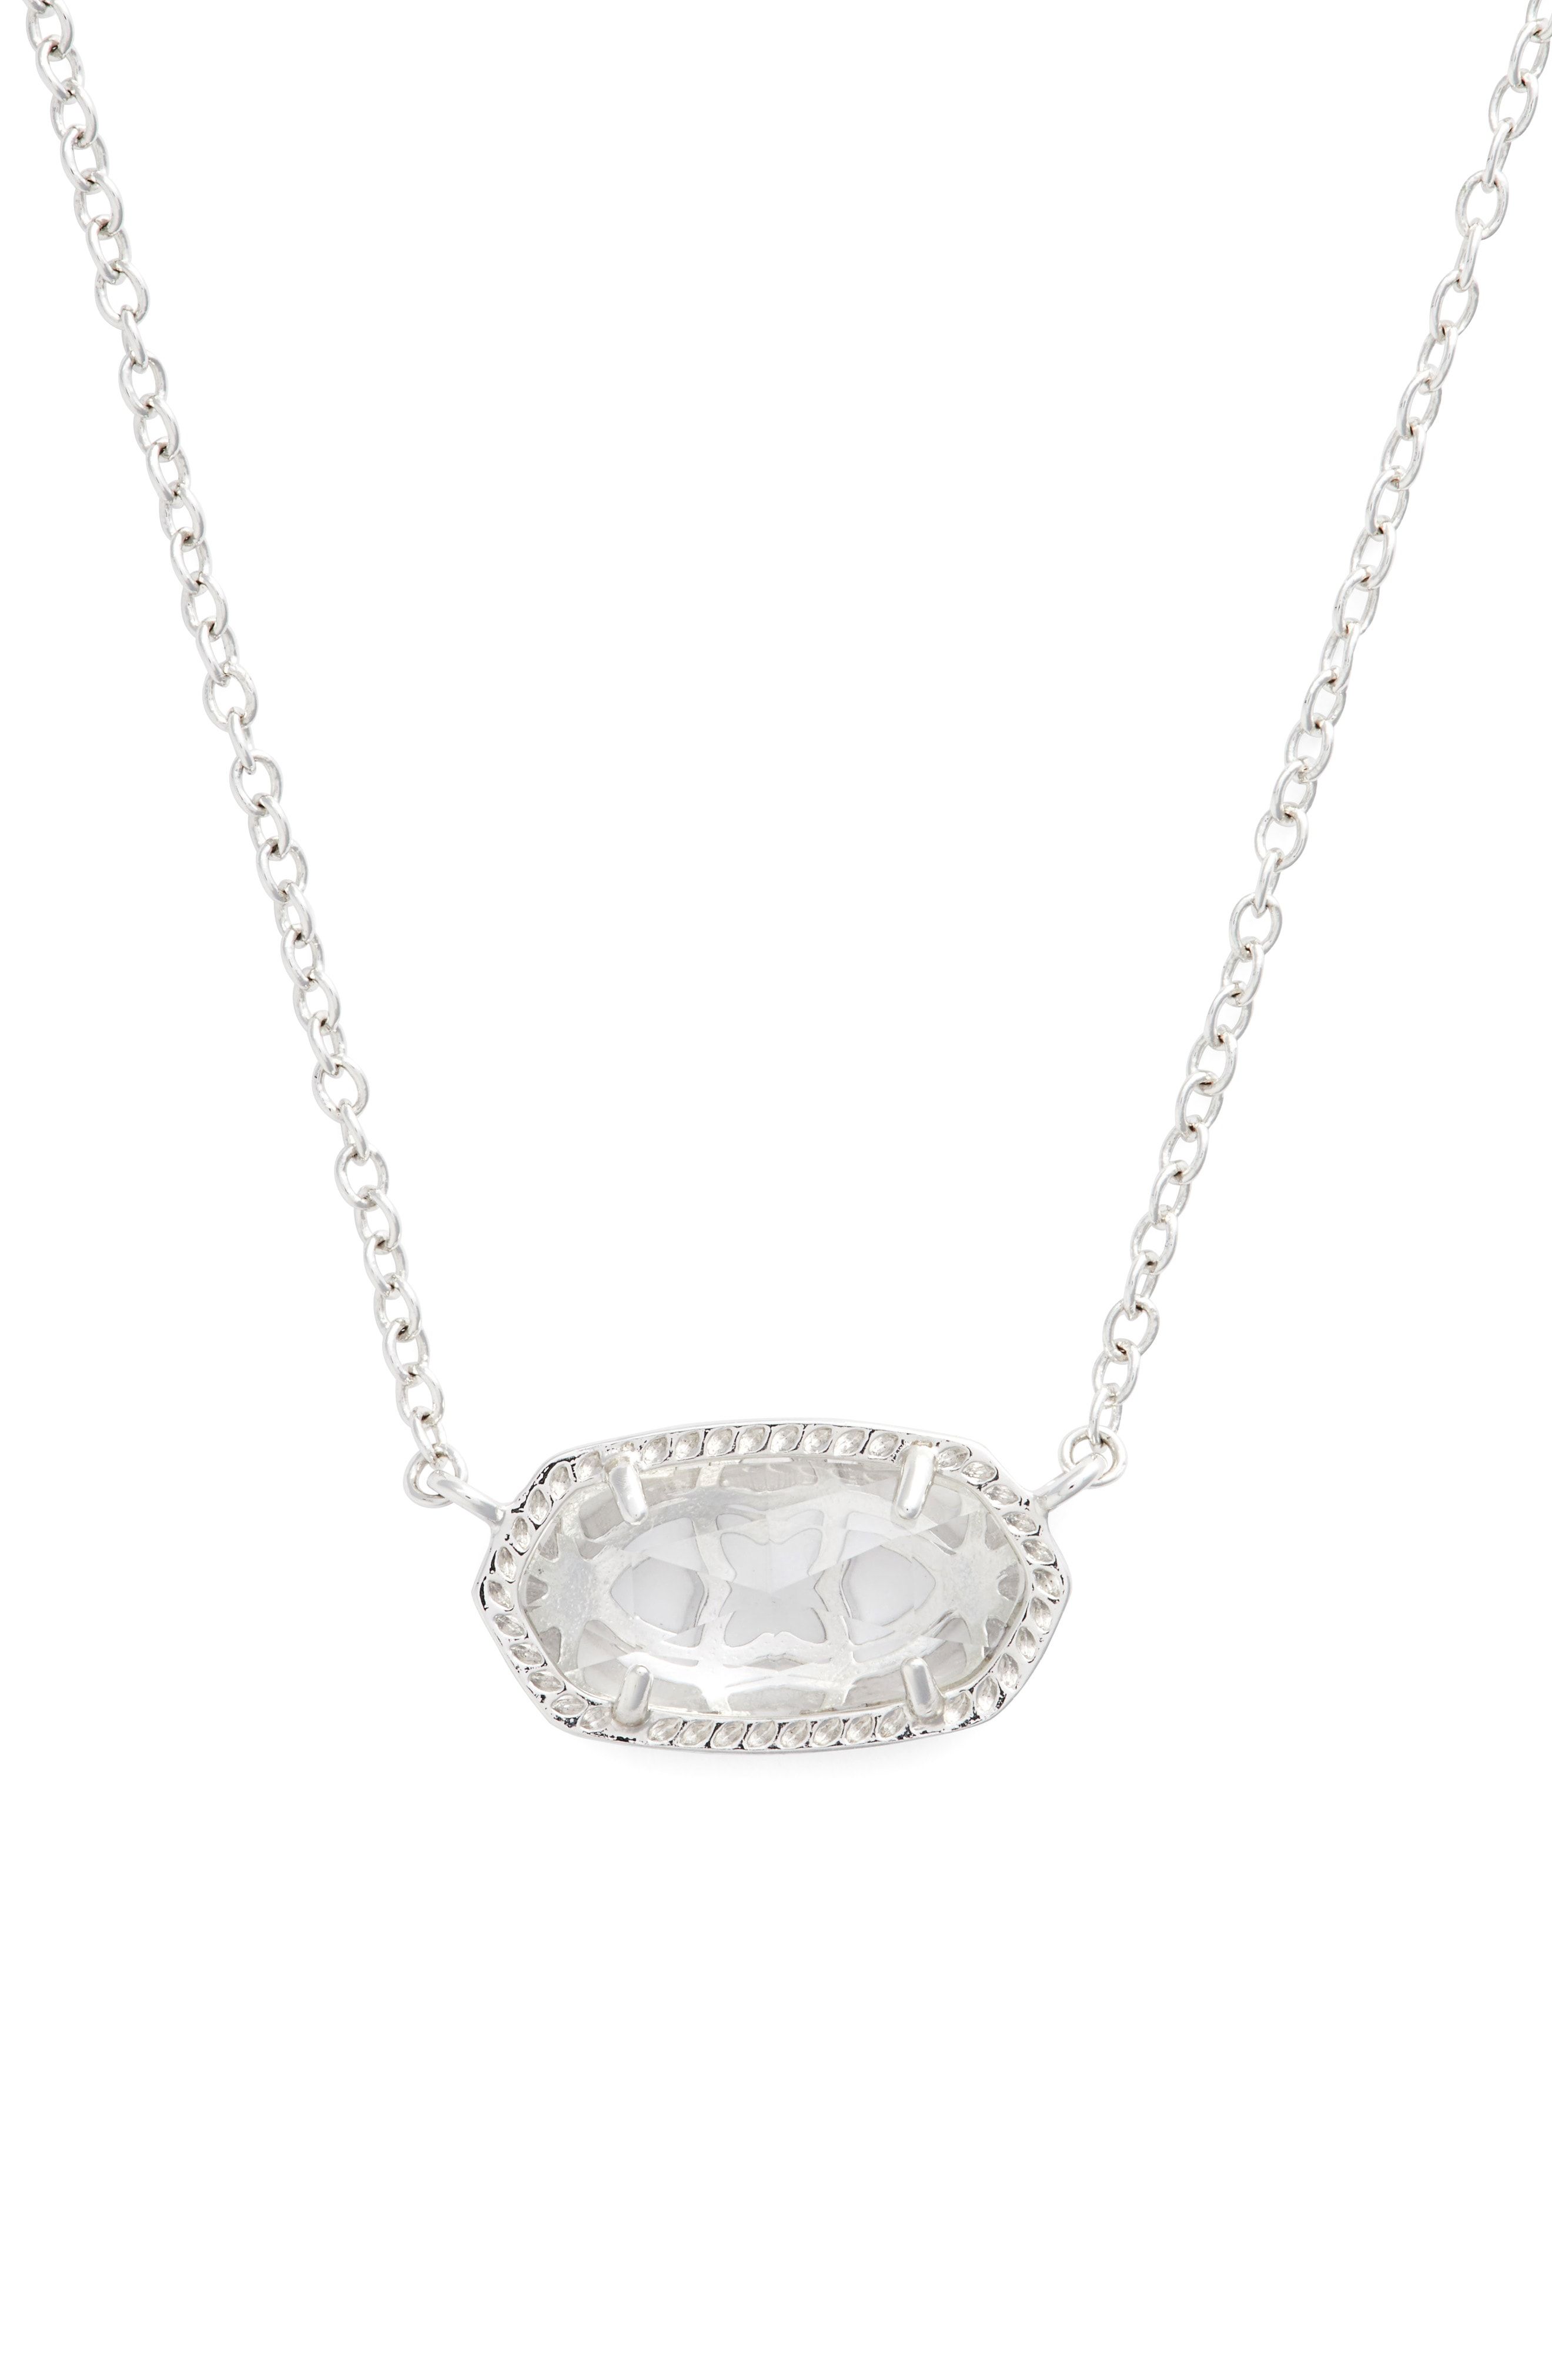 Kendra Scott Elisa Birthstone Pendant Necklace available at #Nordstrom